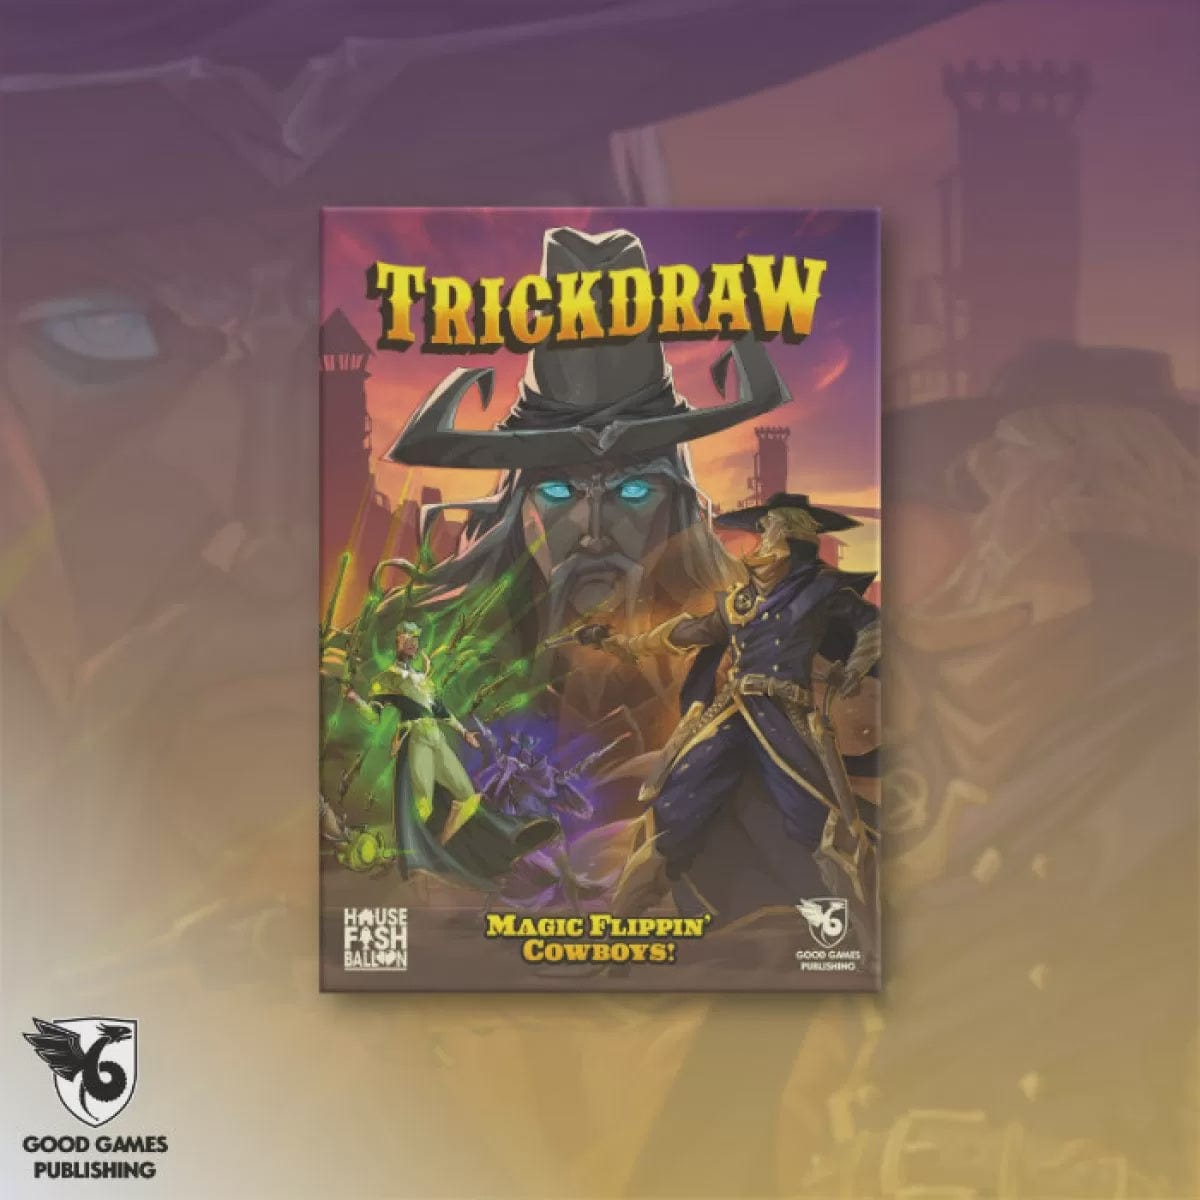 Good Games Publishing Board game Trickdraw